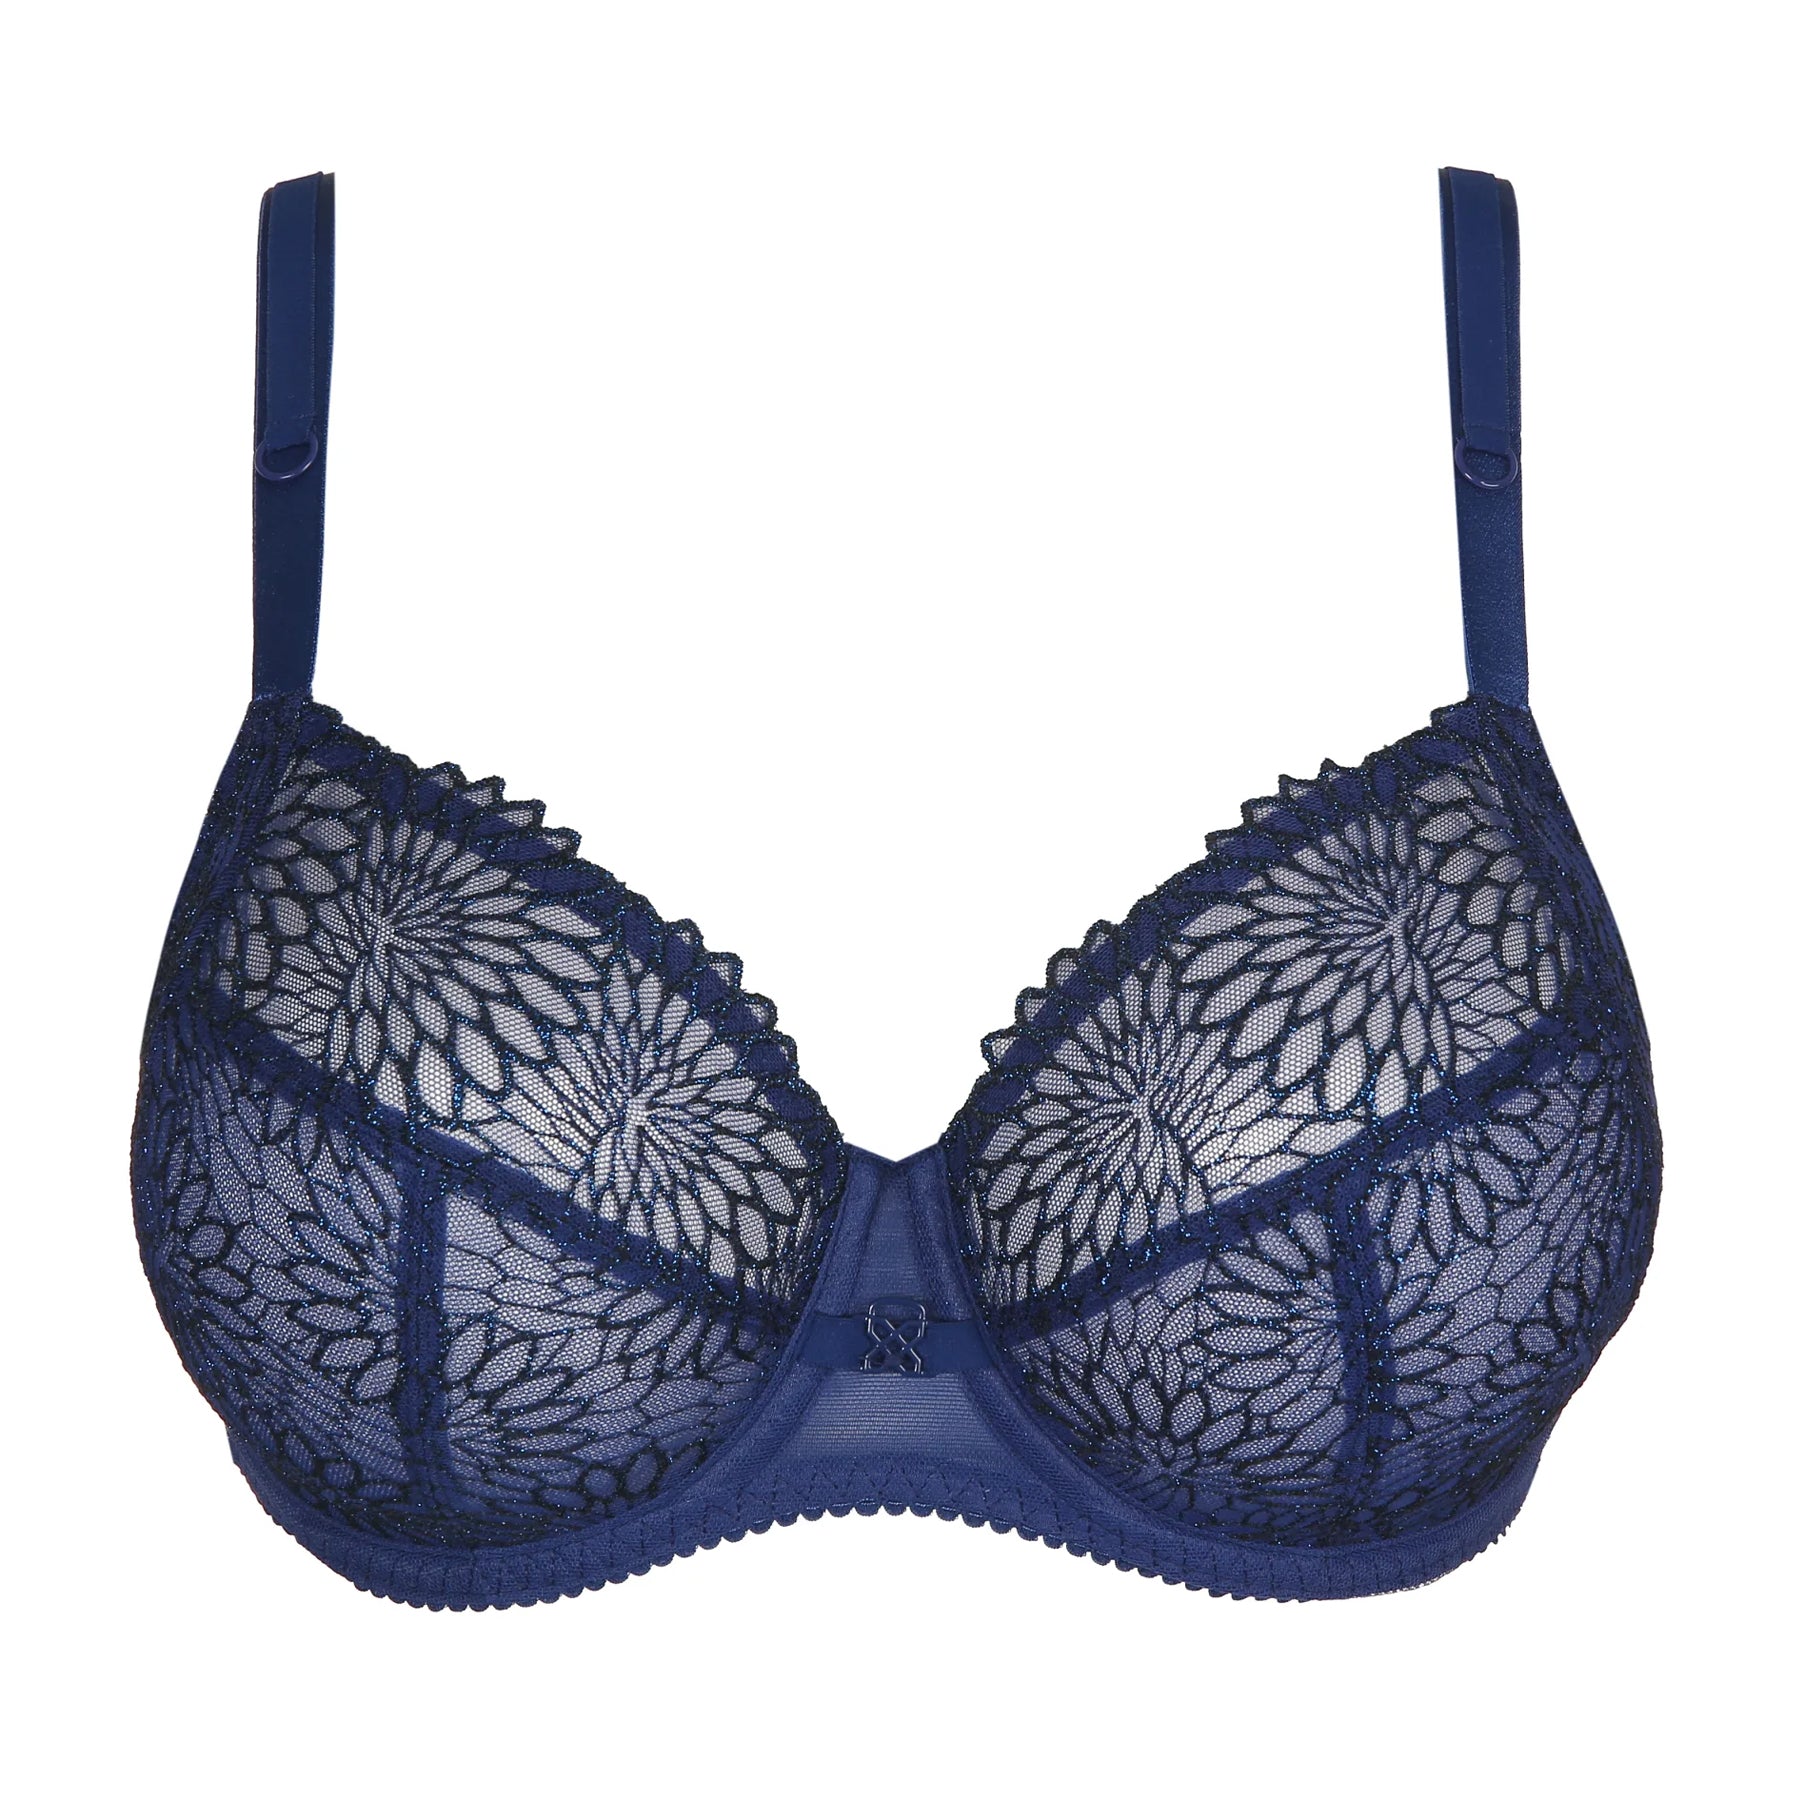 The PERFECT navy colorway - Ashley's Lingerie & Swimwear